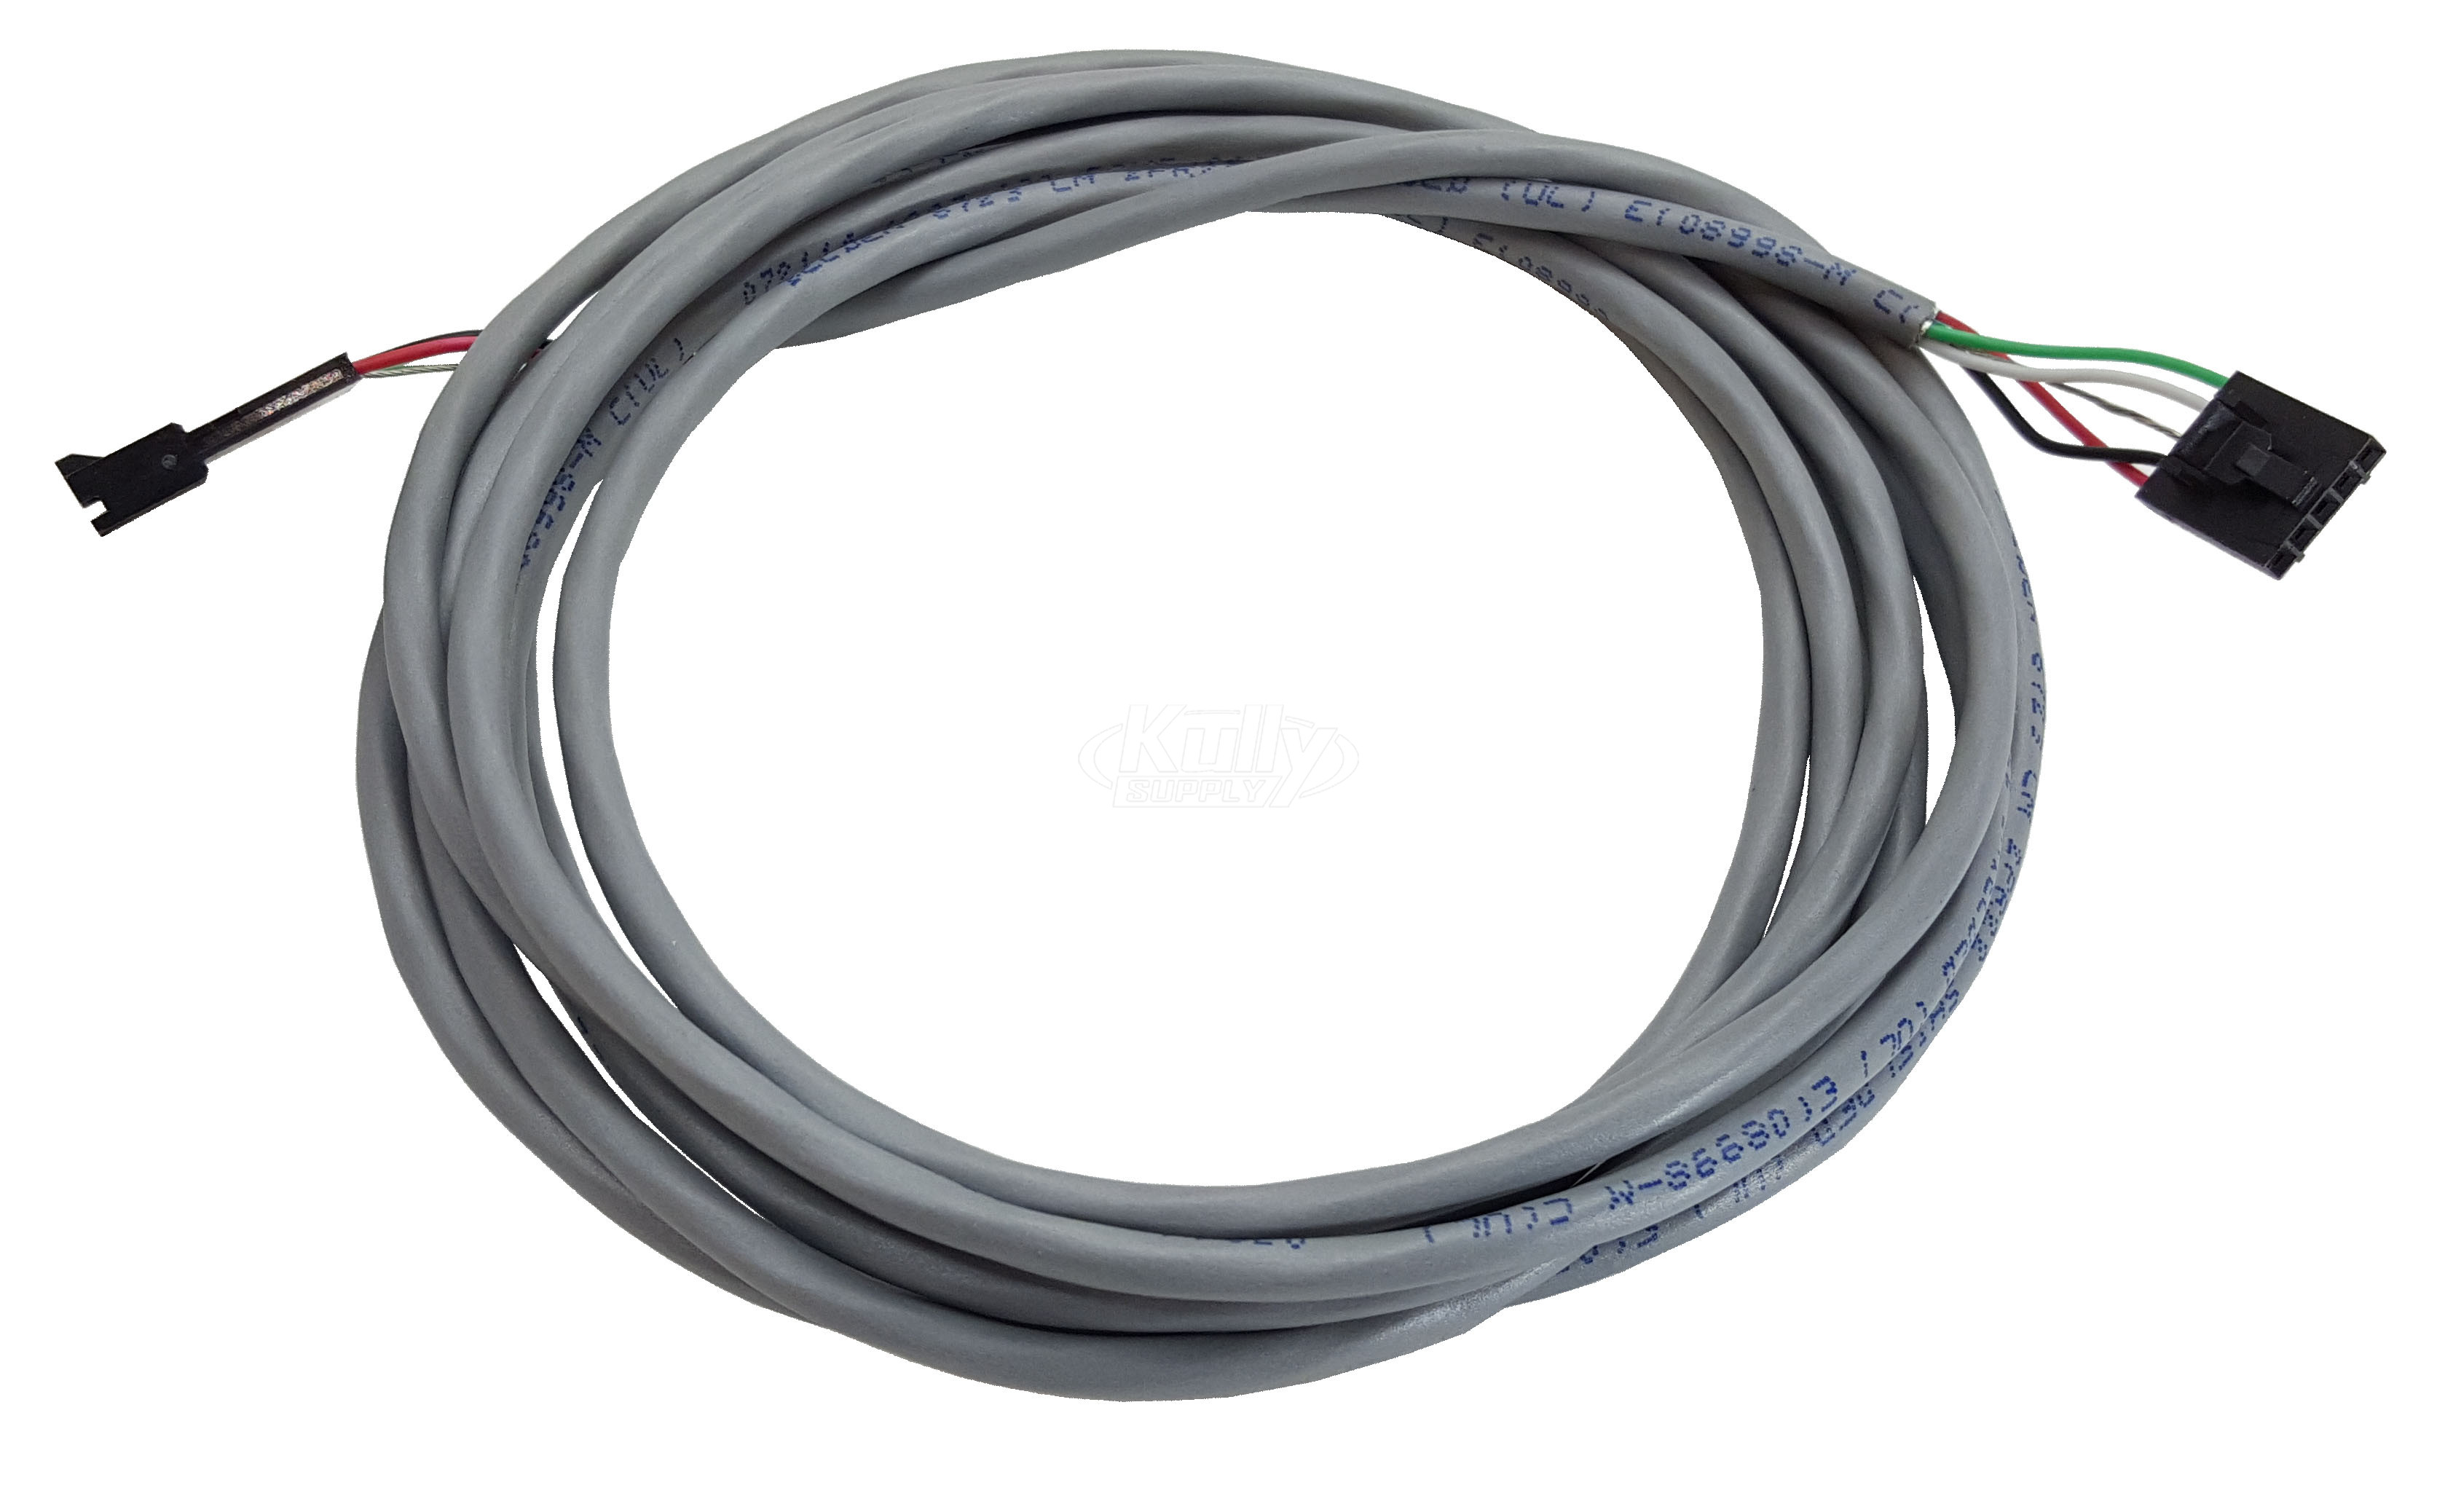 Sloan ETF-1005-108 Faucet to Control Module Cable Extension Kit 108"